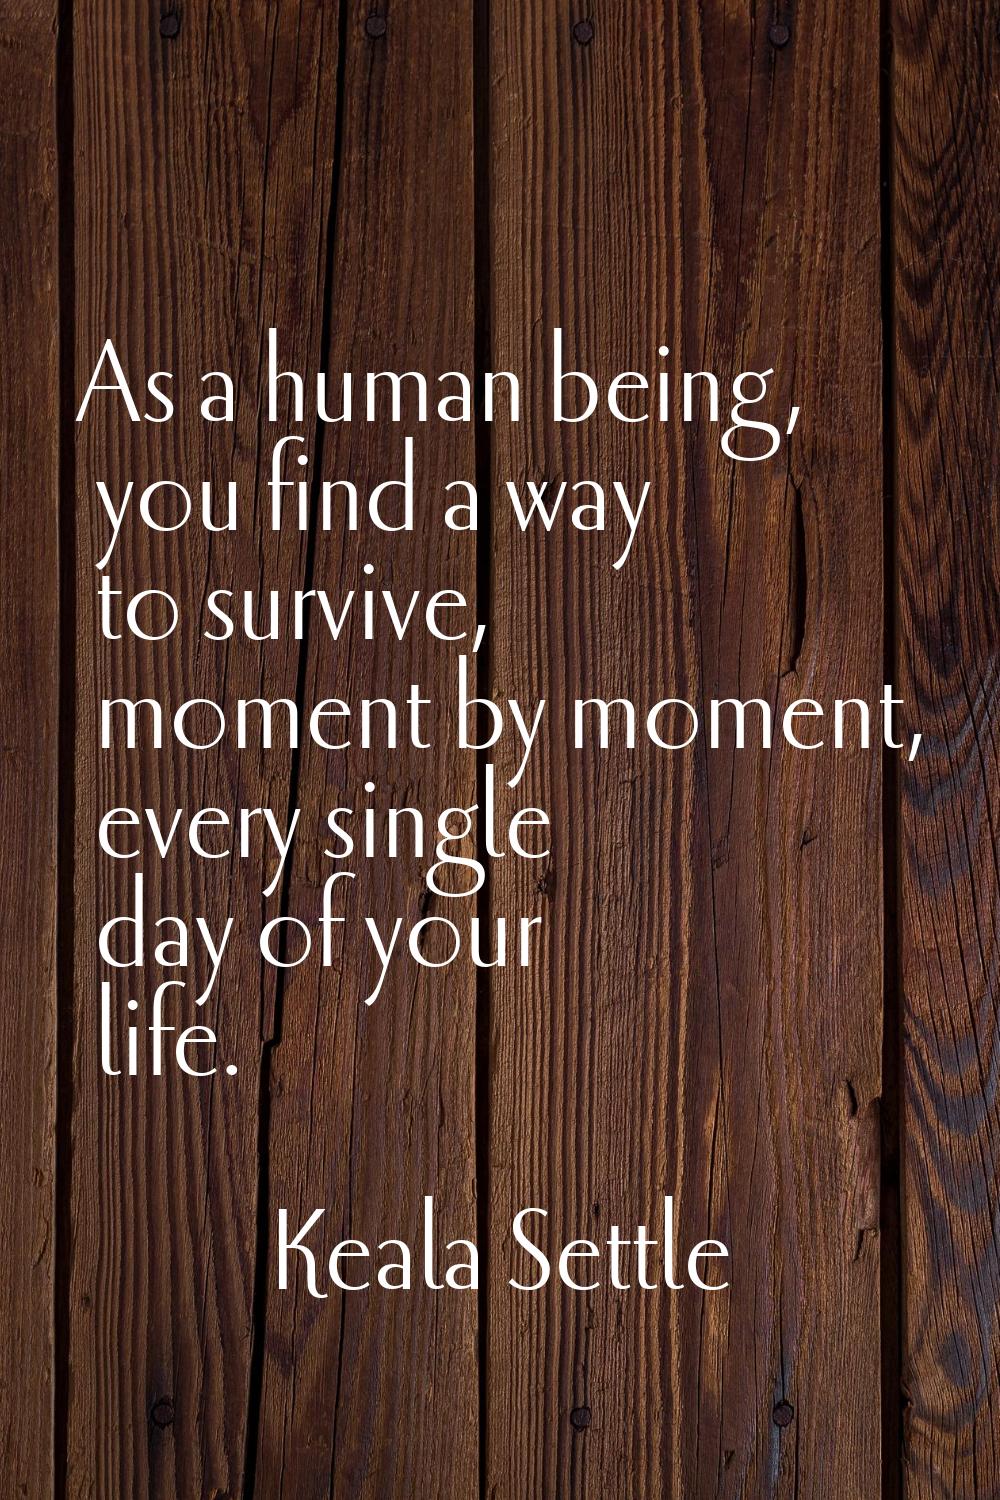 As a human being, you find a way to survive, moment by moment, every single day of your life.